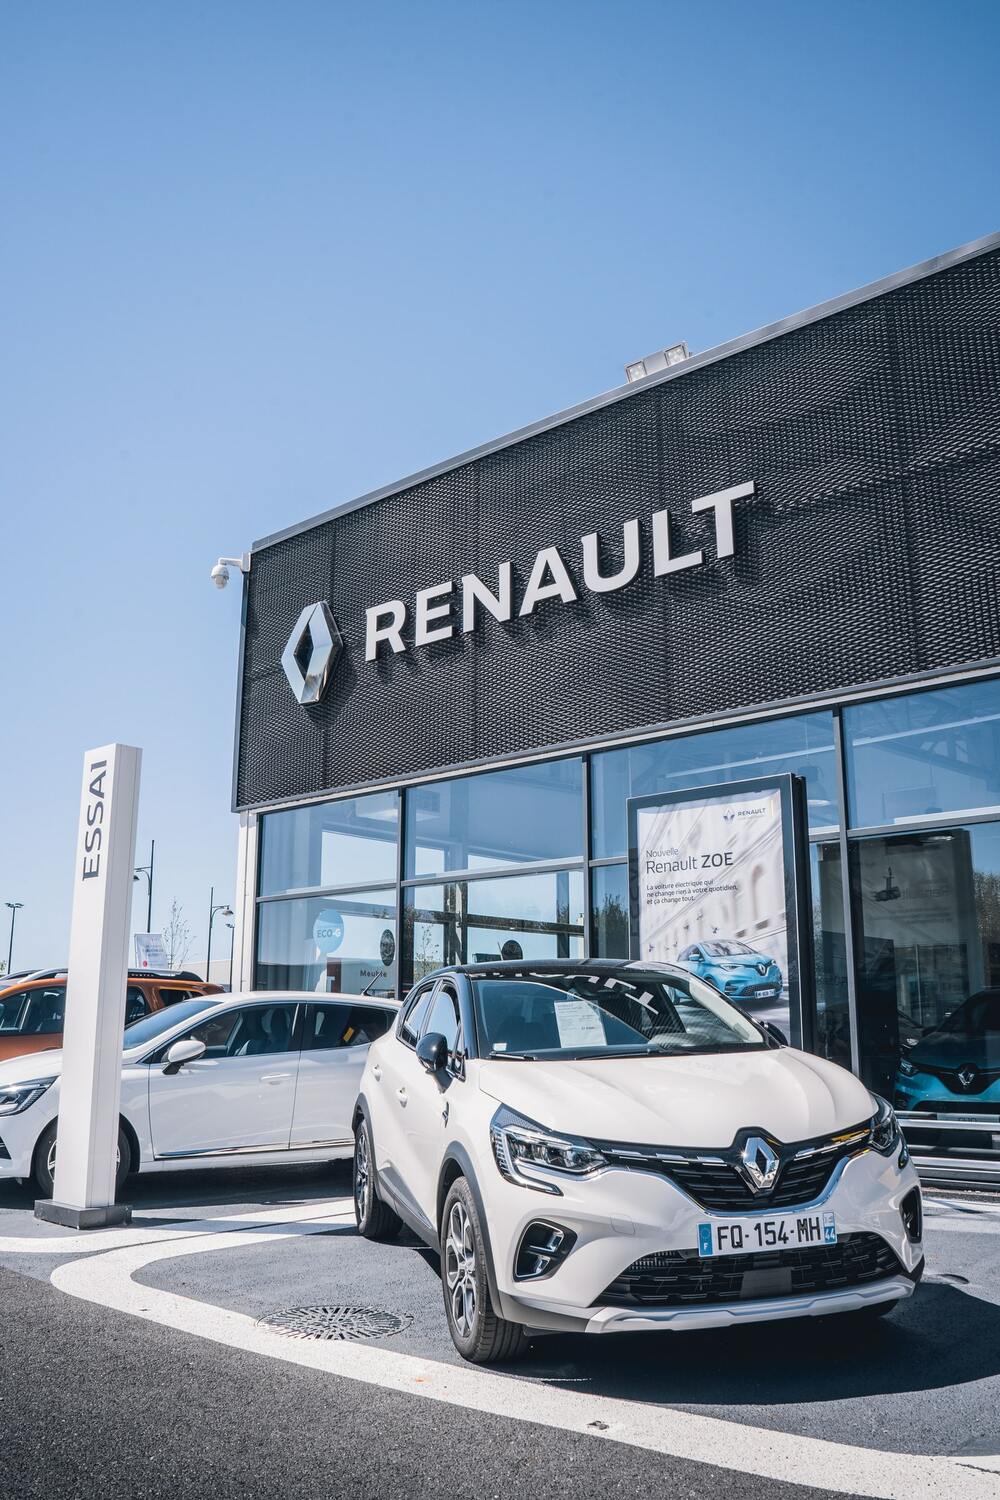 <span style="font-weight: bold;">Renault</span>